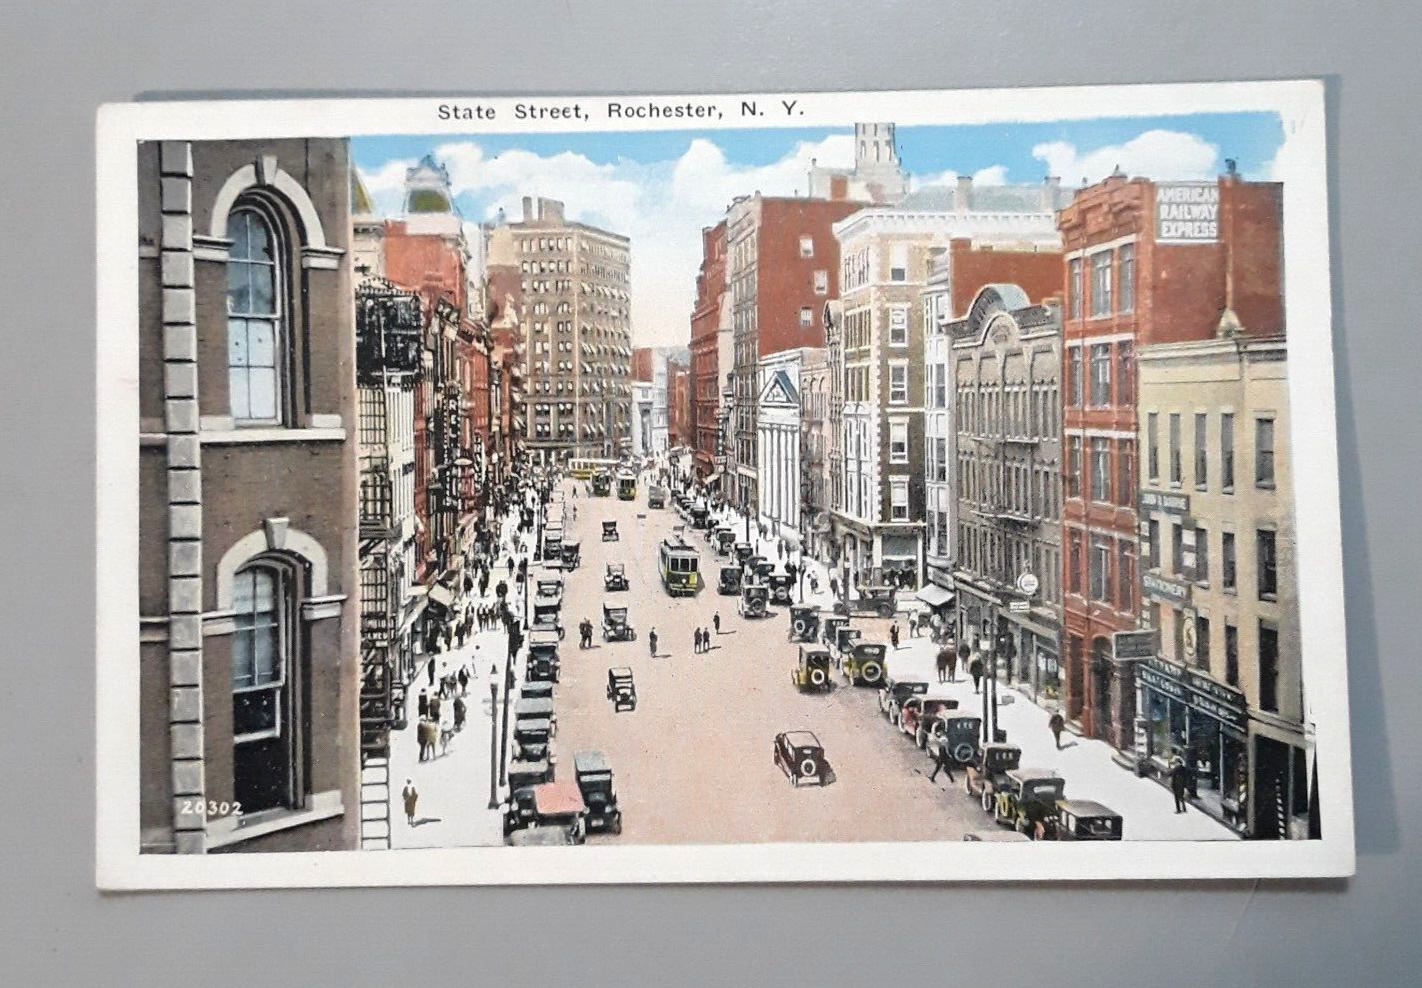 VTG 1934 Postcard Rochester NY - STATE STREET American Railway Express